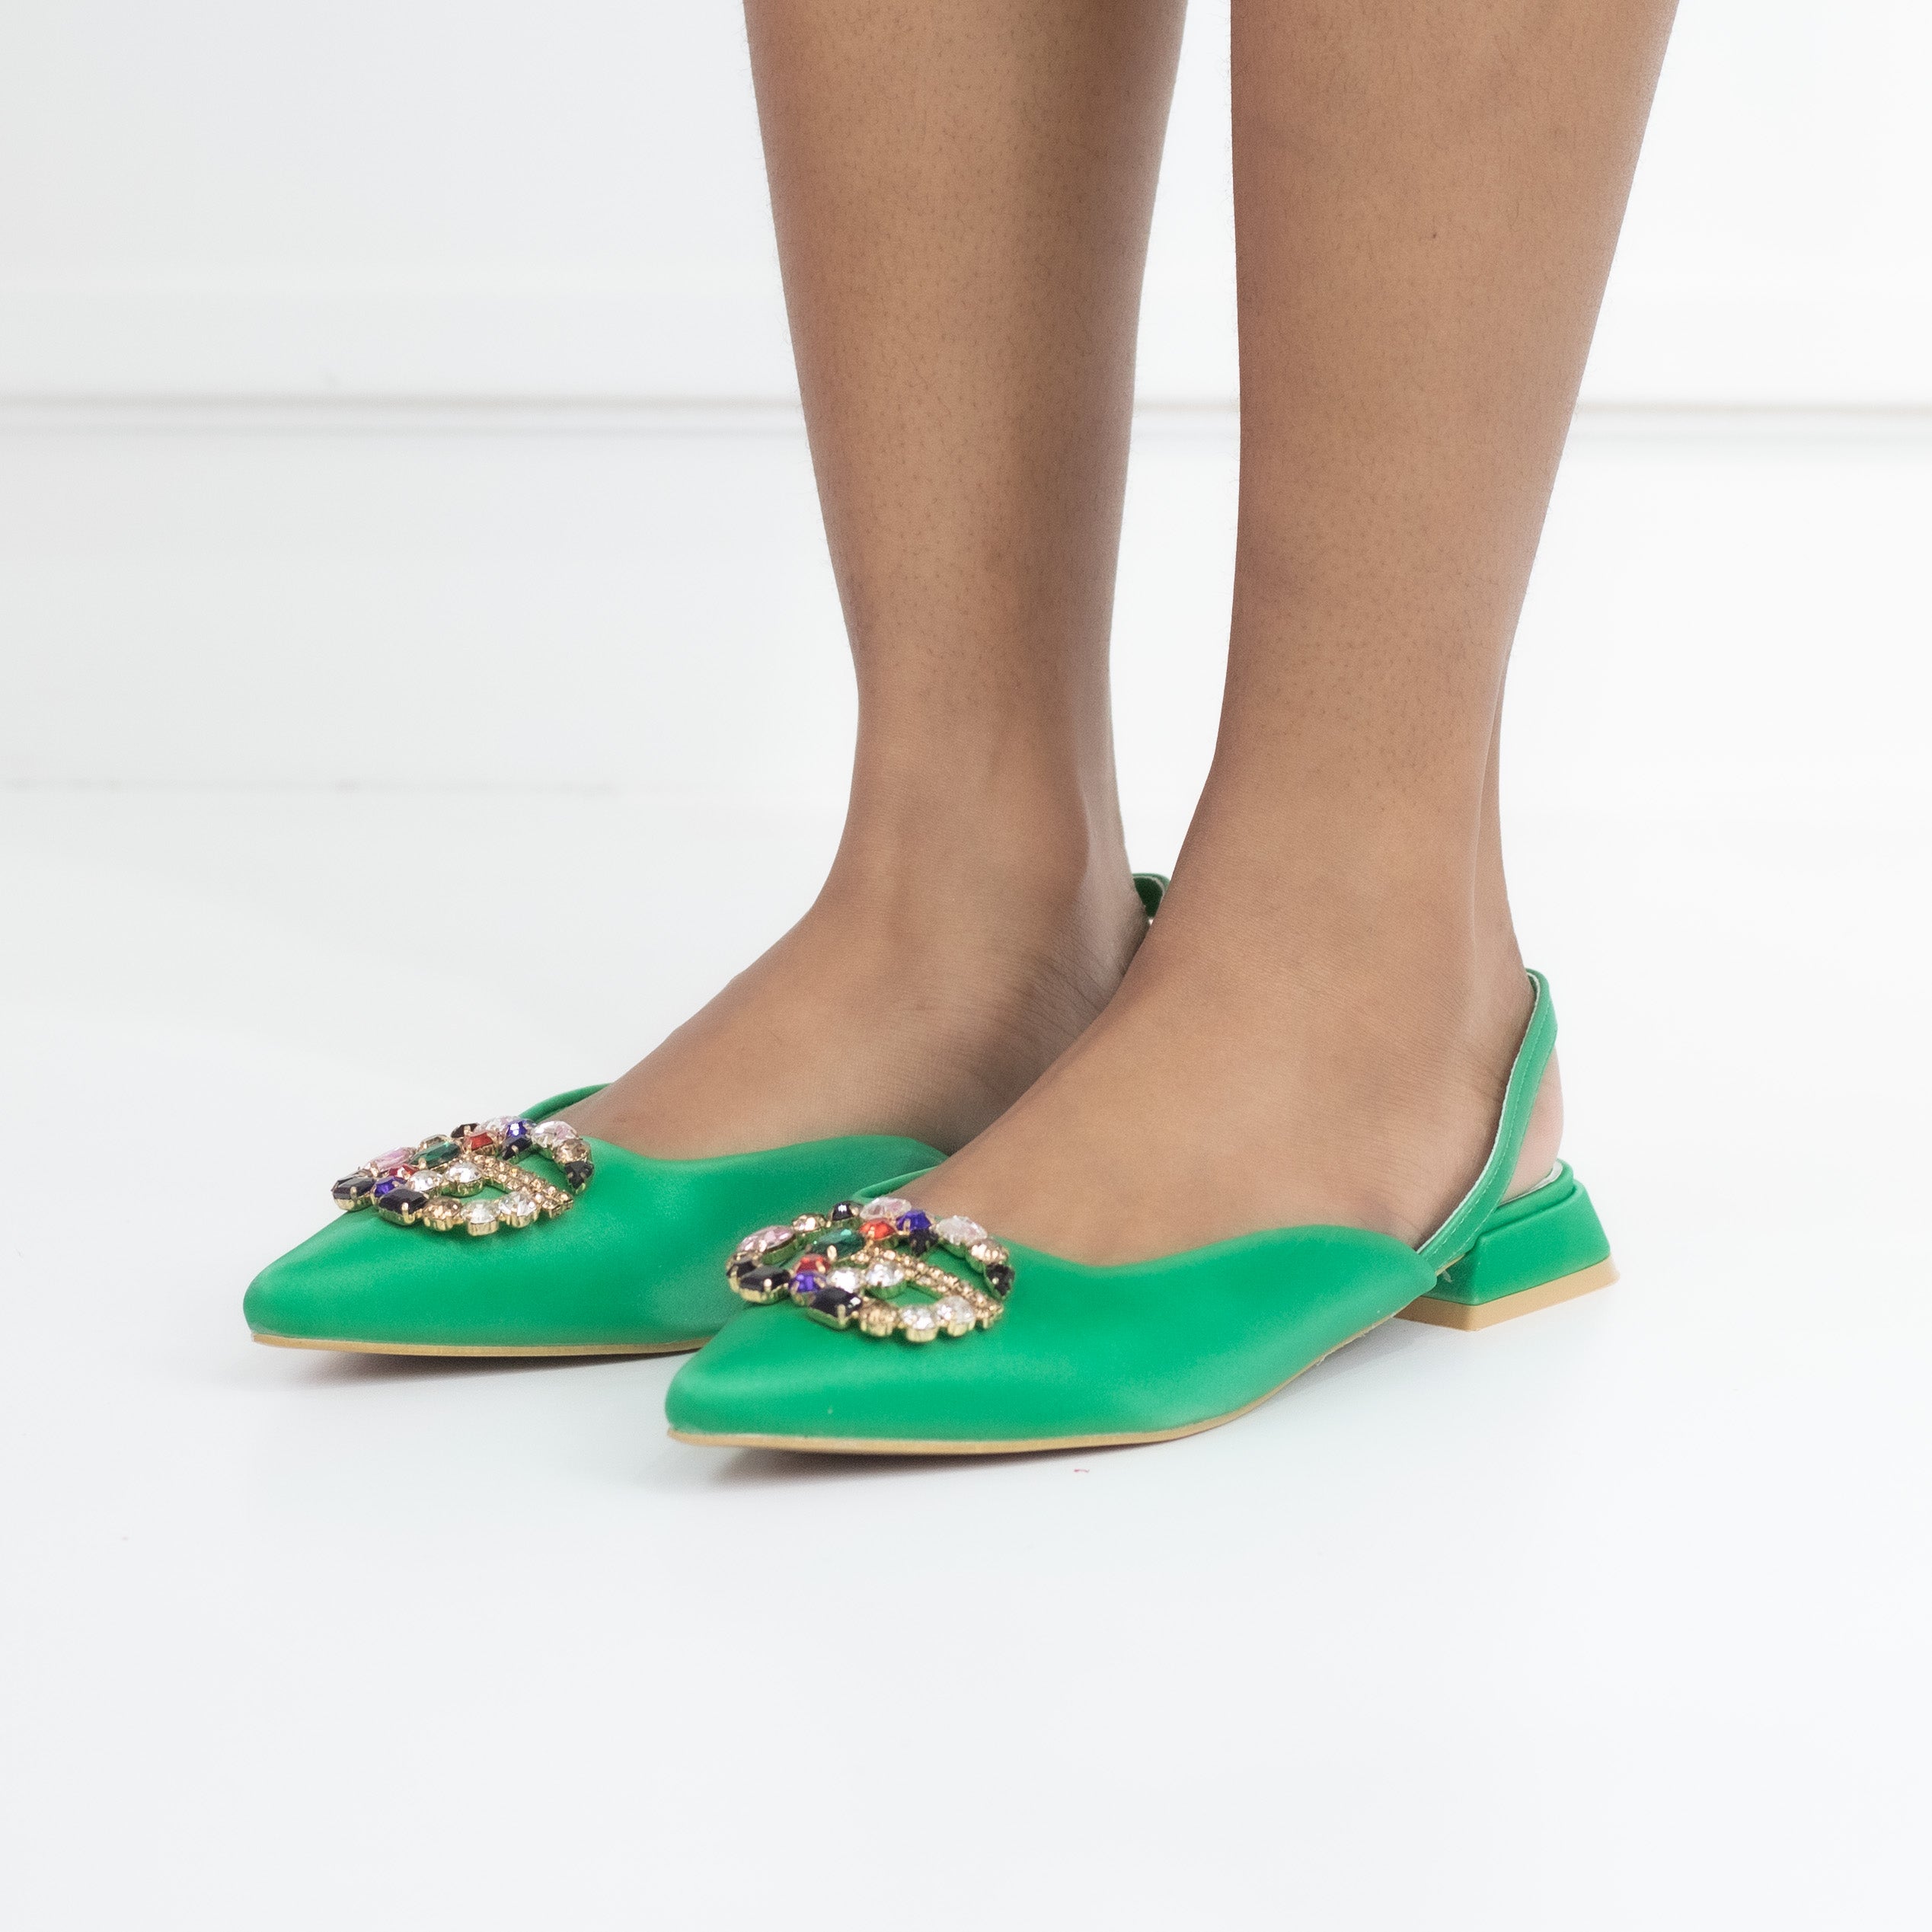 Green Satin pointy sling back with gold bling trim dilara